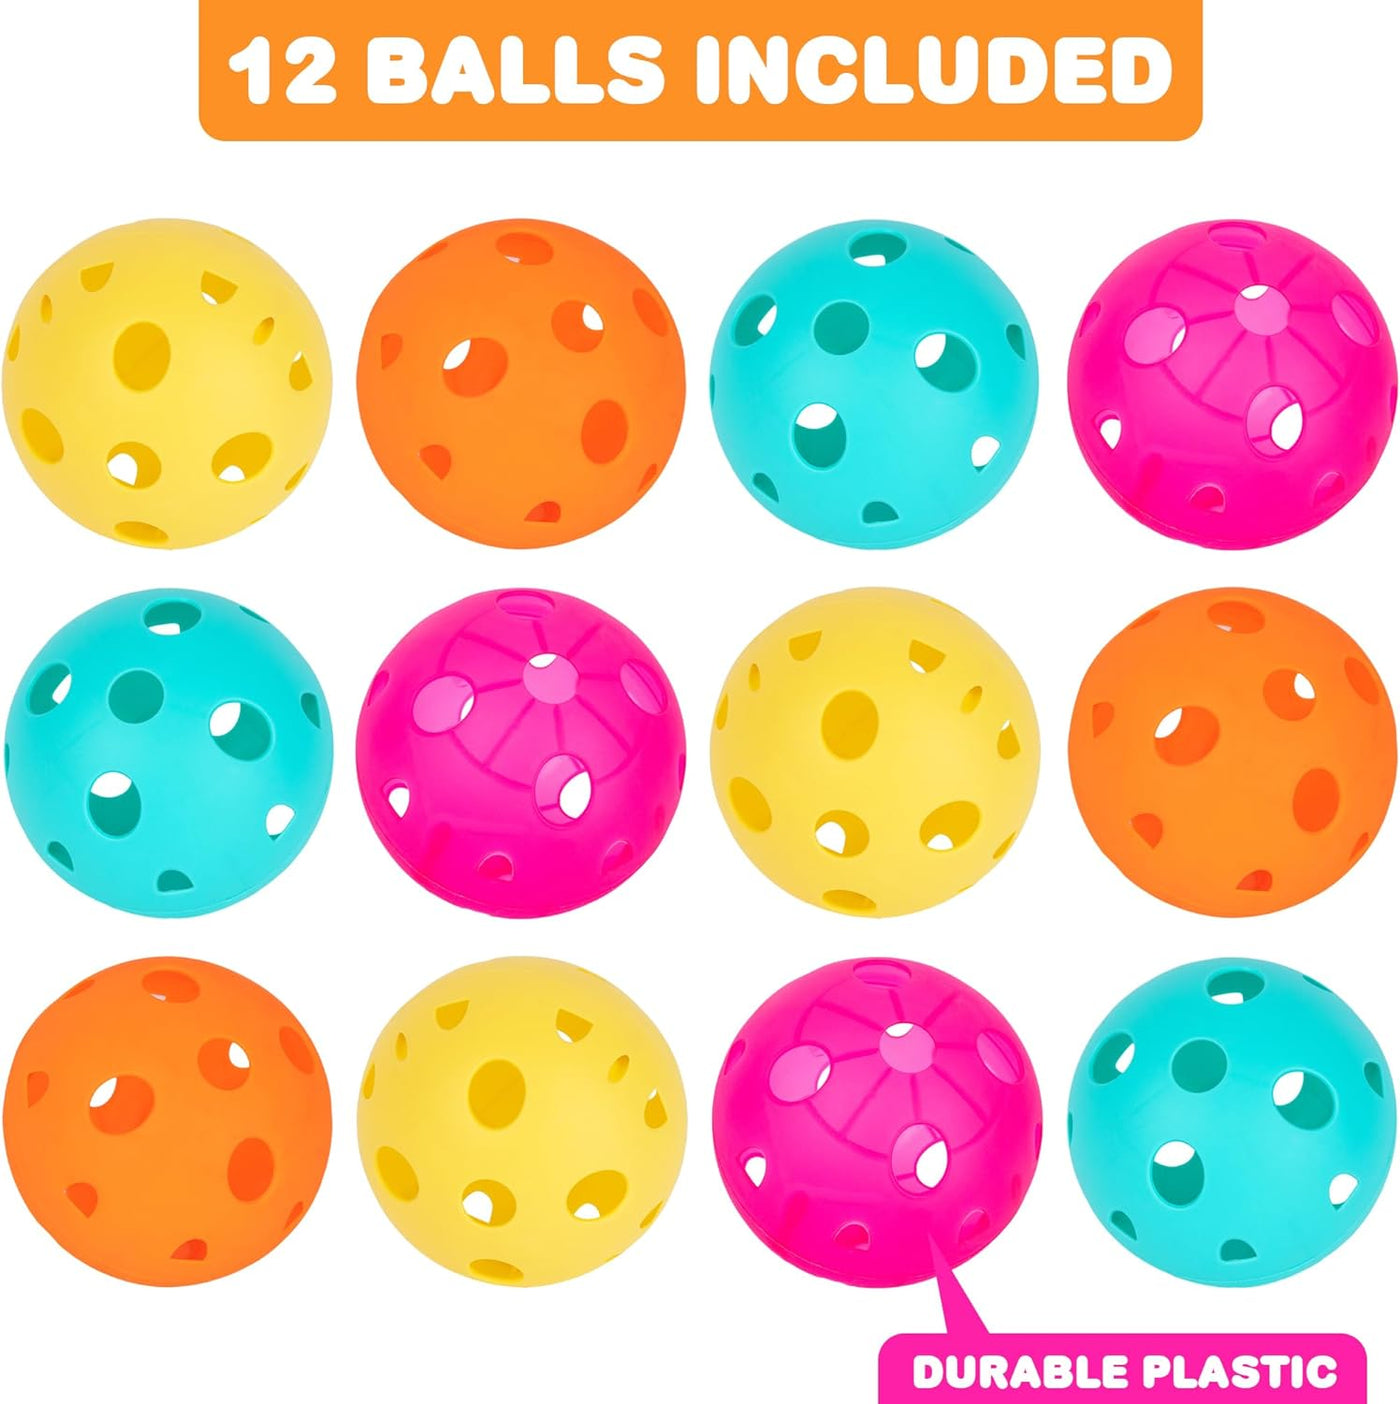 Extra Balls for Scoop Ball Game - Set of 12 - Plastic Balls in 4 Vibrant Colors